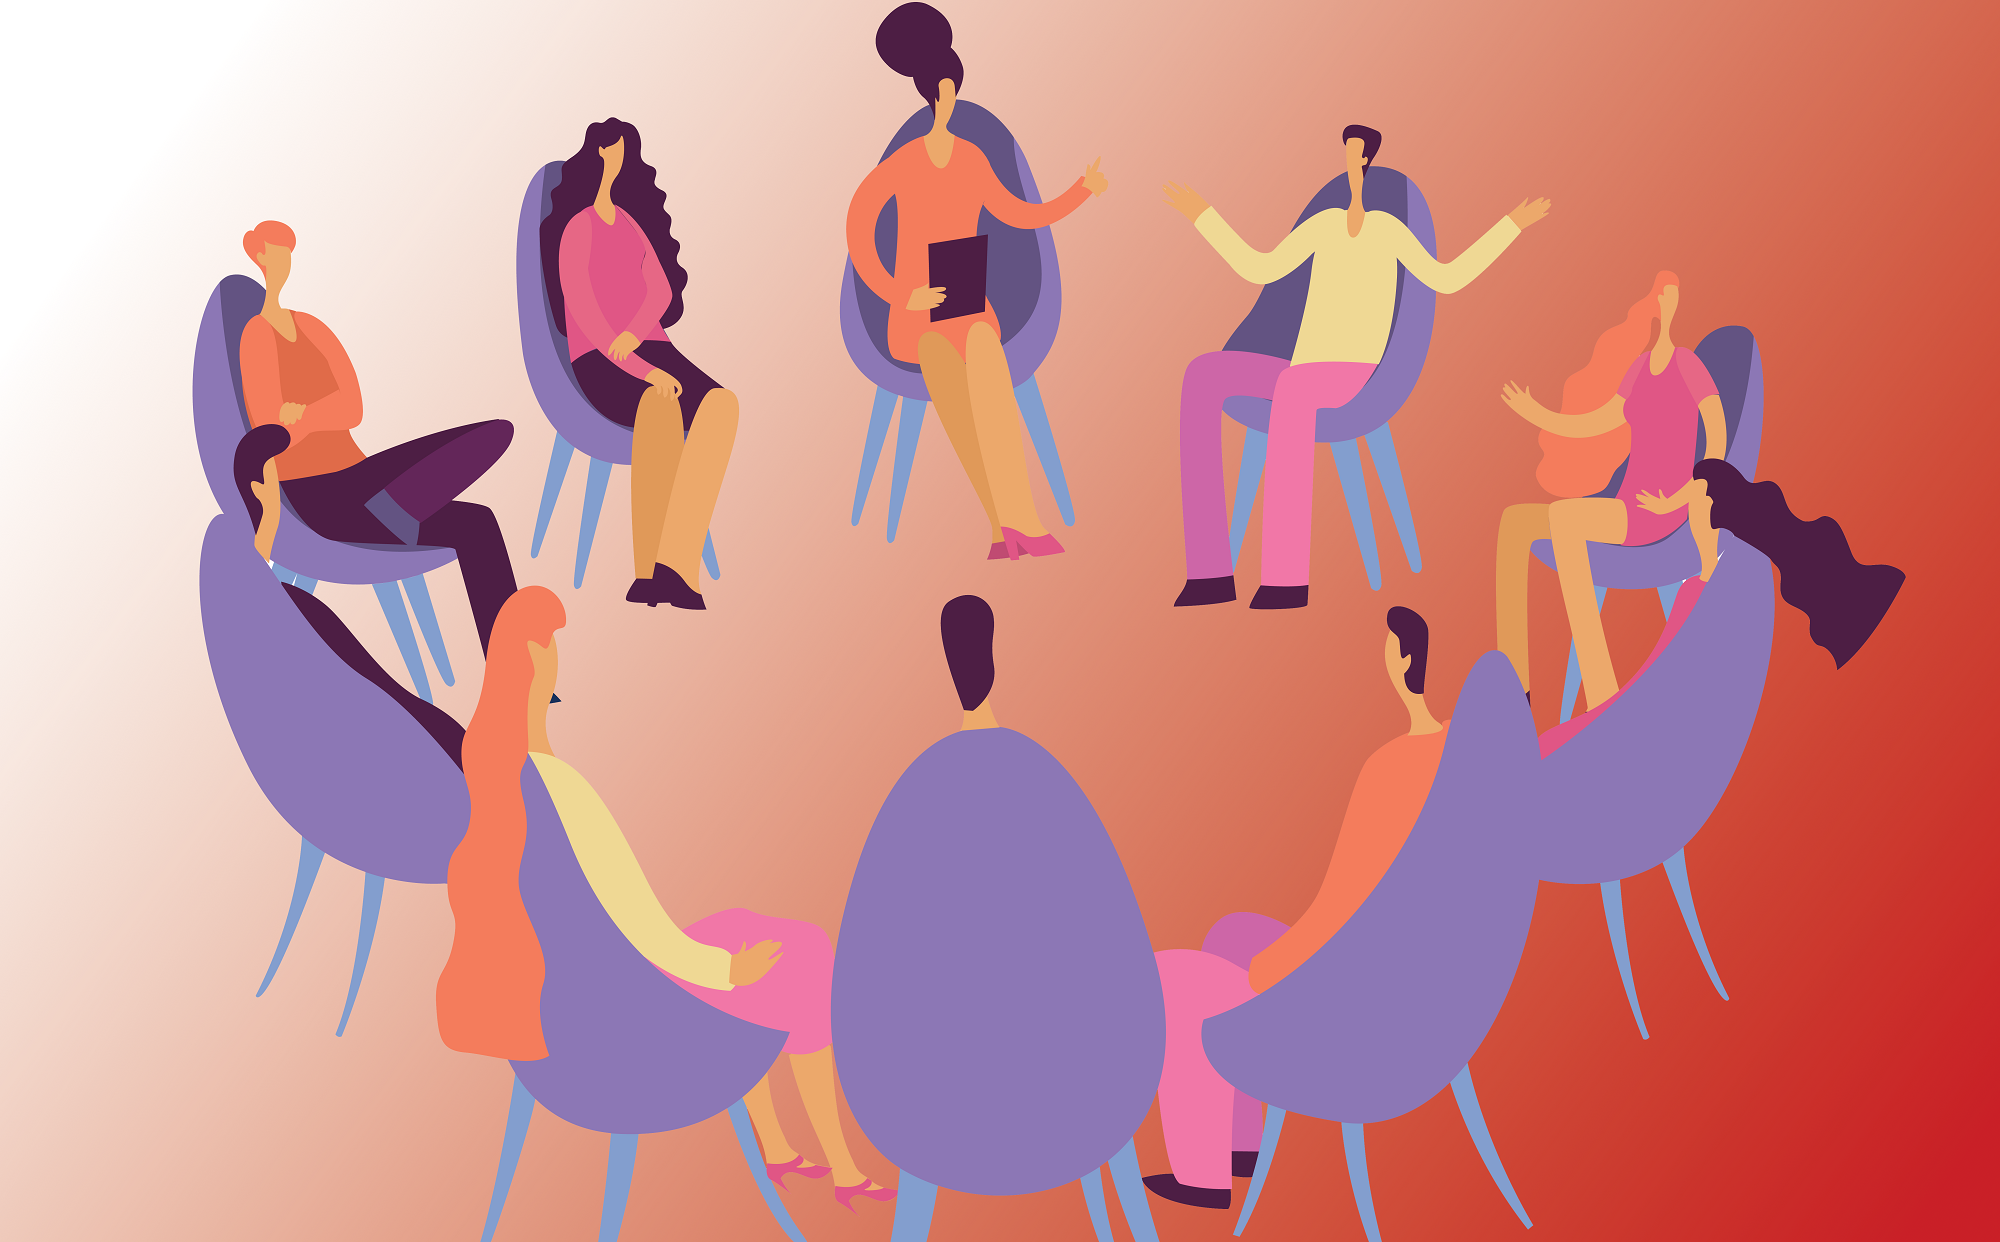 Image description: An illustration of a diverse group of people sitting in a circle. They are sitting in chairs. One person, who is masculine presenting, appears to be speaking. His arms are raised slightly. The rest are listening.